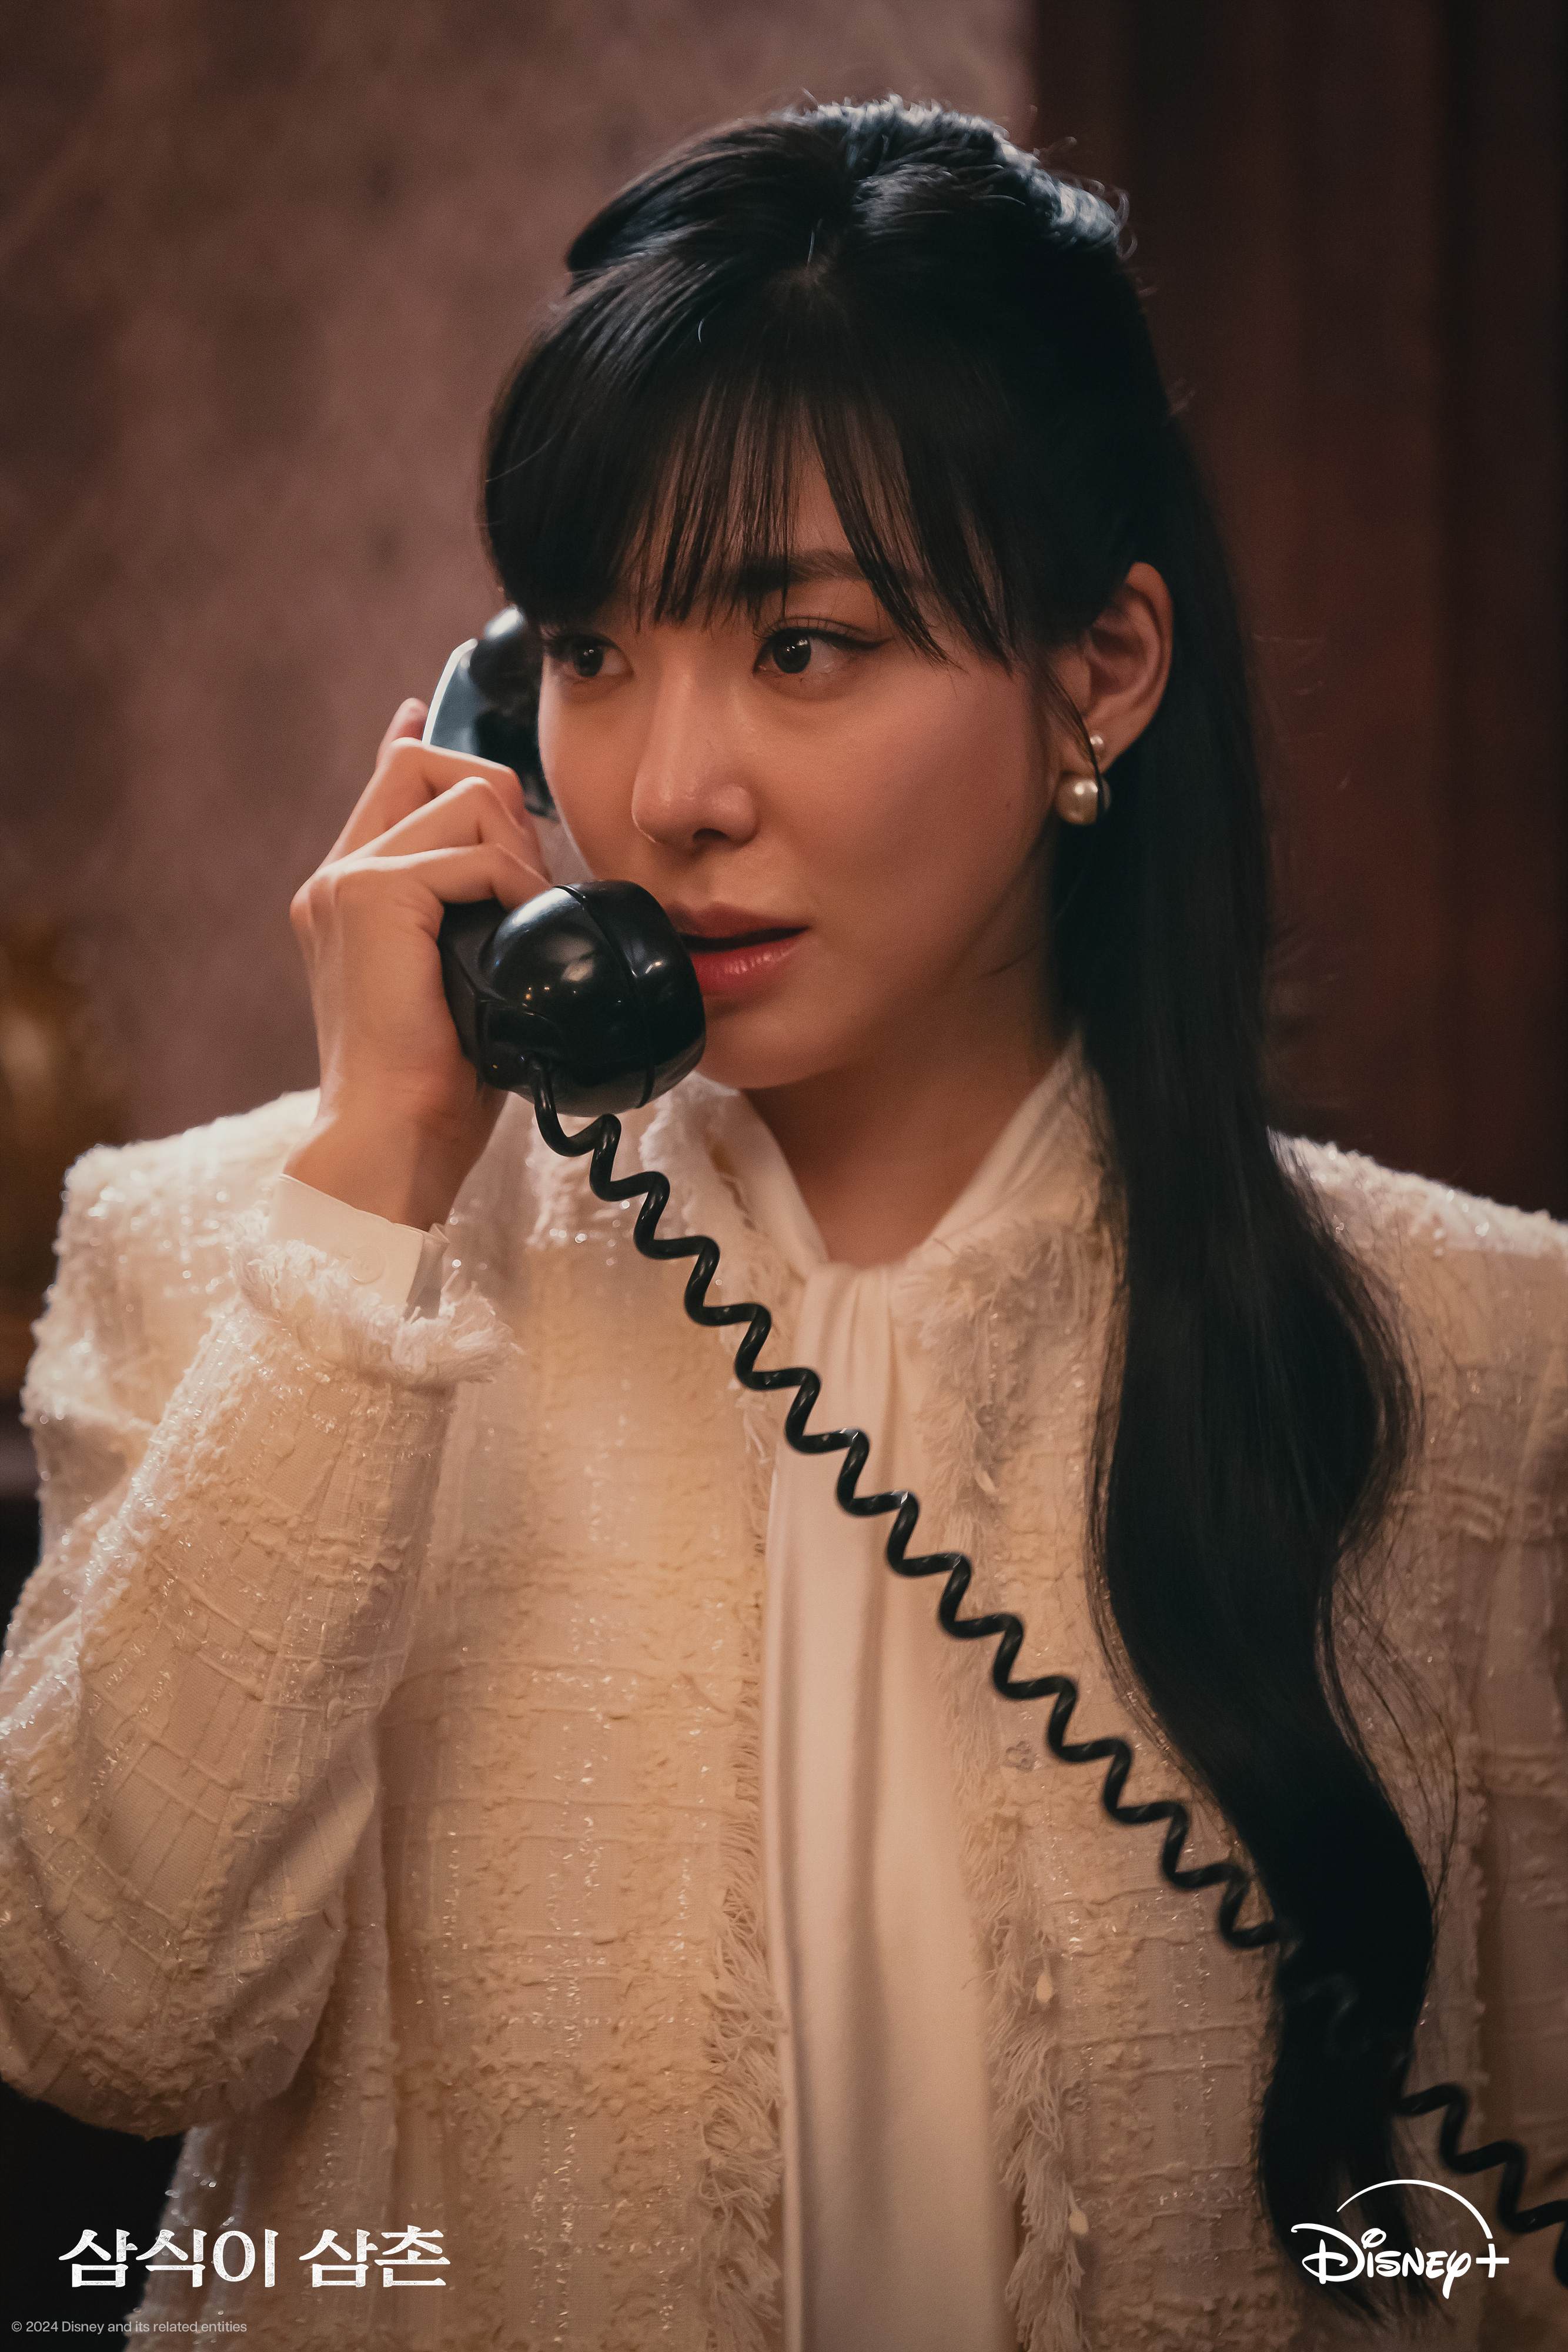 Tiffany Young Is A Charismatic Foundation Director In New Drama 